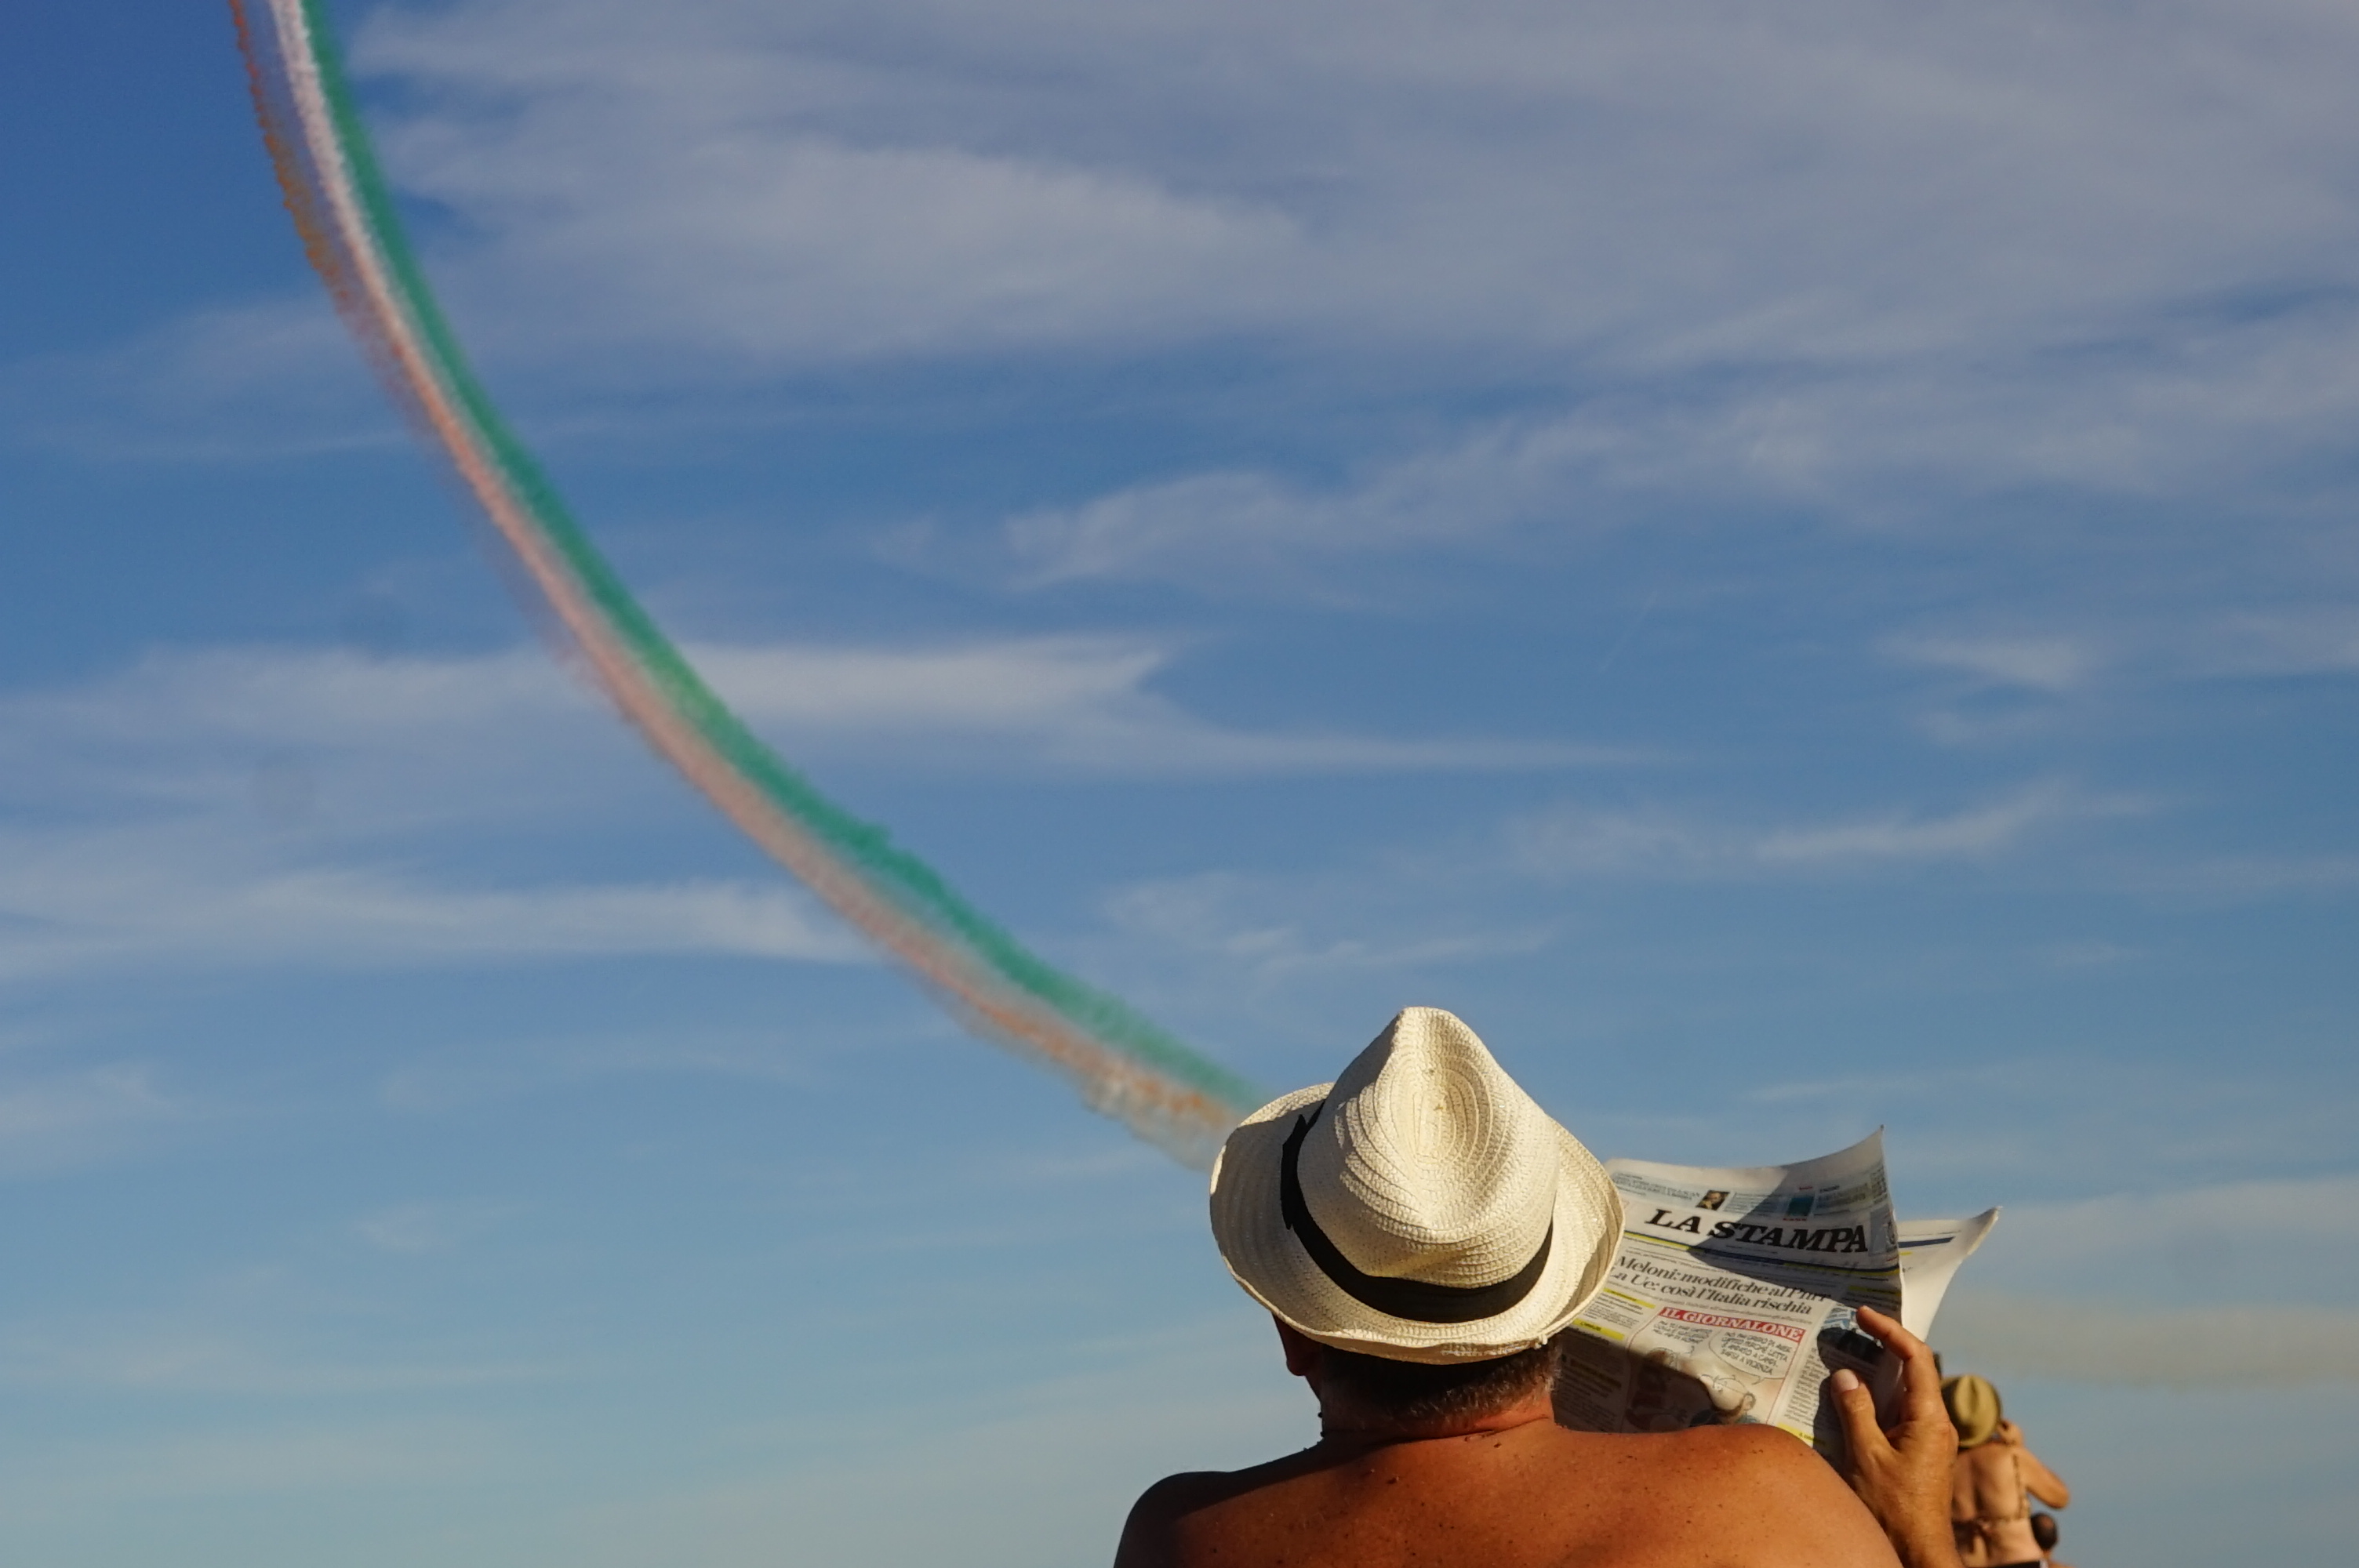 Italian newspaper. "The Italian tricolor arrows perform in the sky above the city of Portorecanati but on the beach there is a gentleman who is more interested in reading the newspaper. © Maurizio Ghiandoni, Italy, entry, Open Competition, Creative, 2023 Sony World Photography Awards